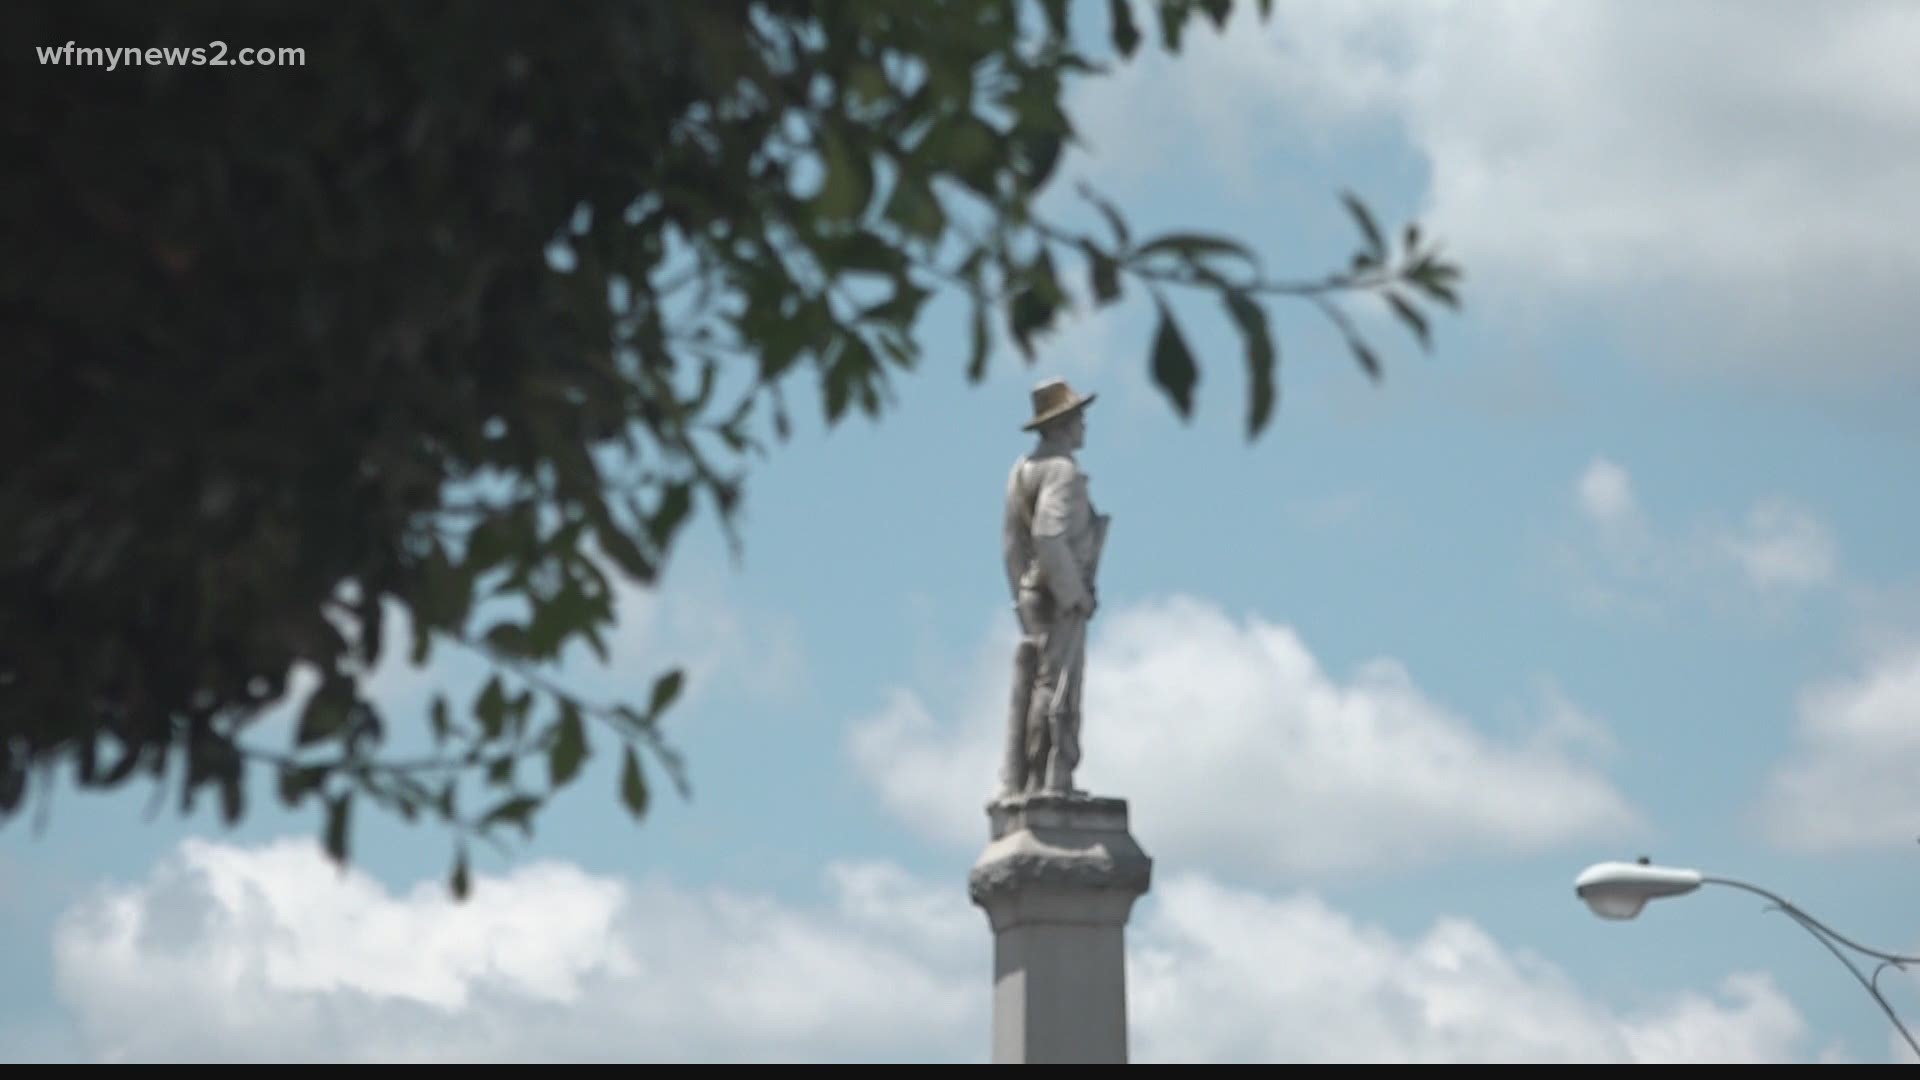 Leaders from the public and private sectors in Alamance county are recommending the removal of the confederate monument in downtown Graham.